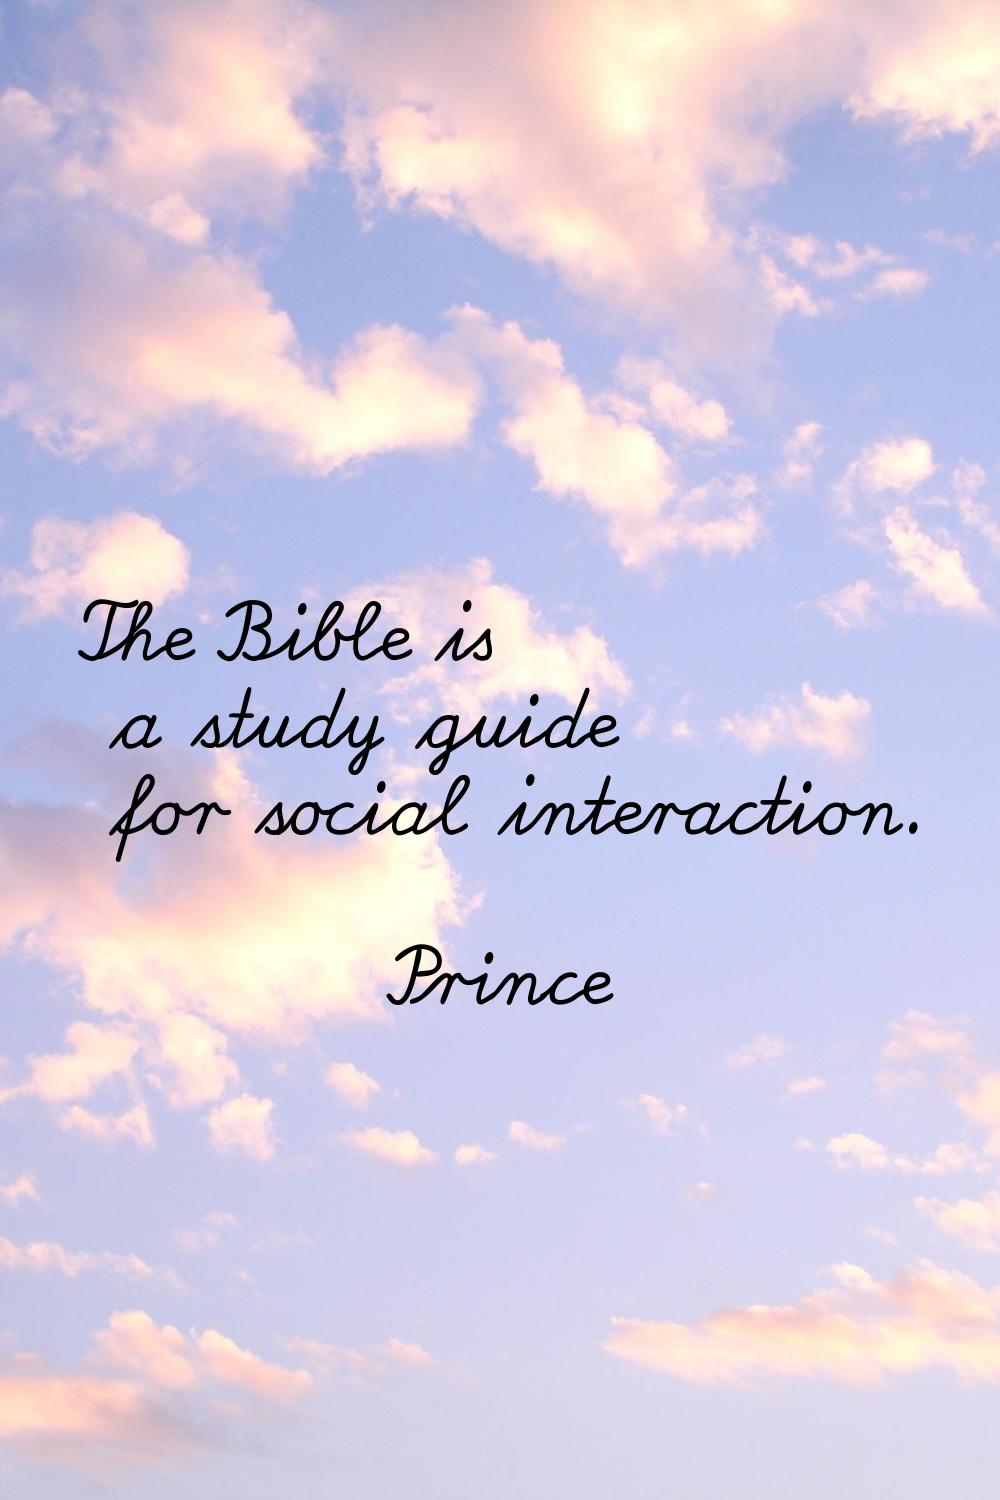 The Bible is a study guide for social interaction.